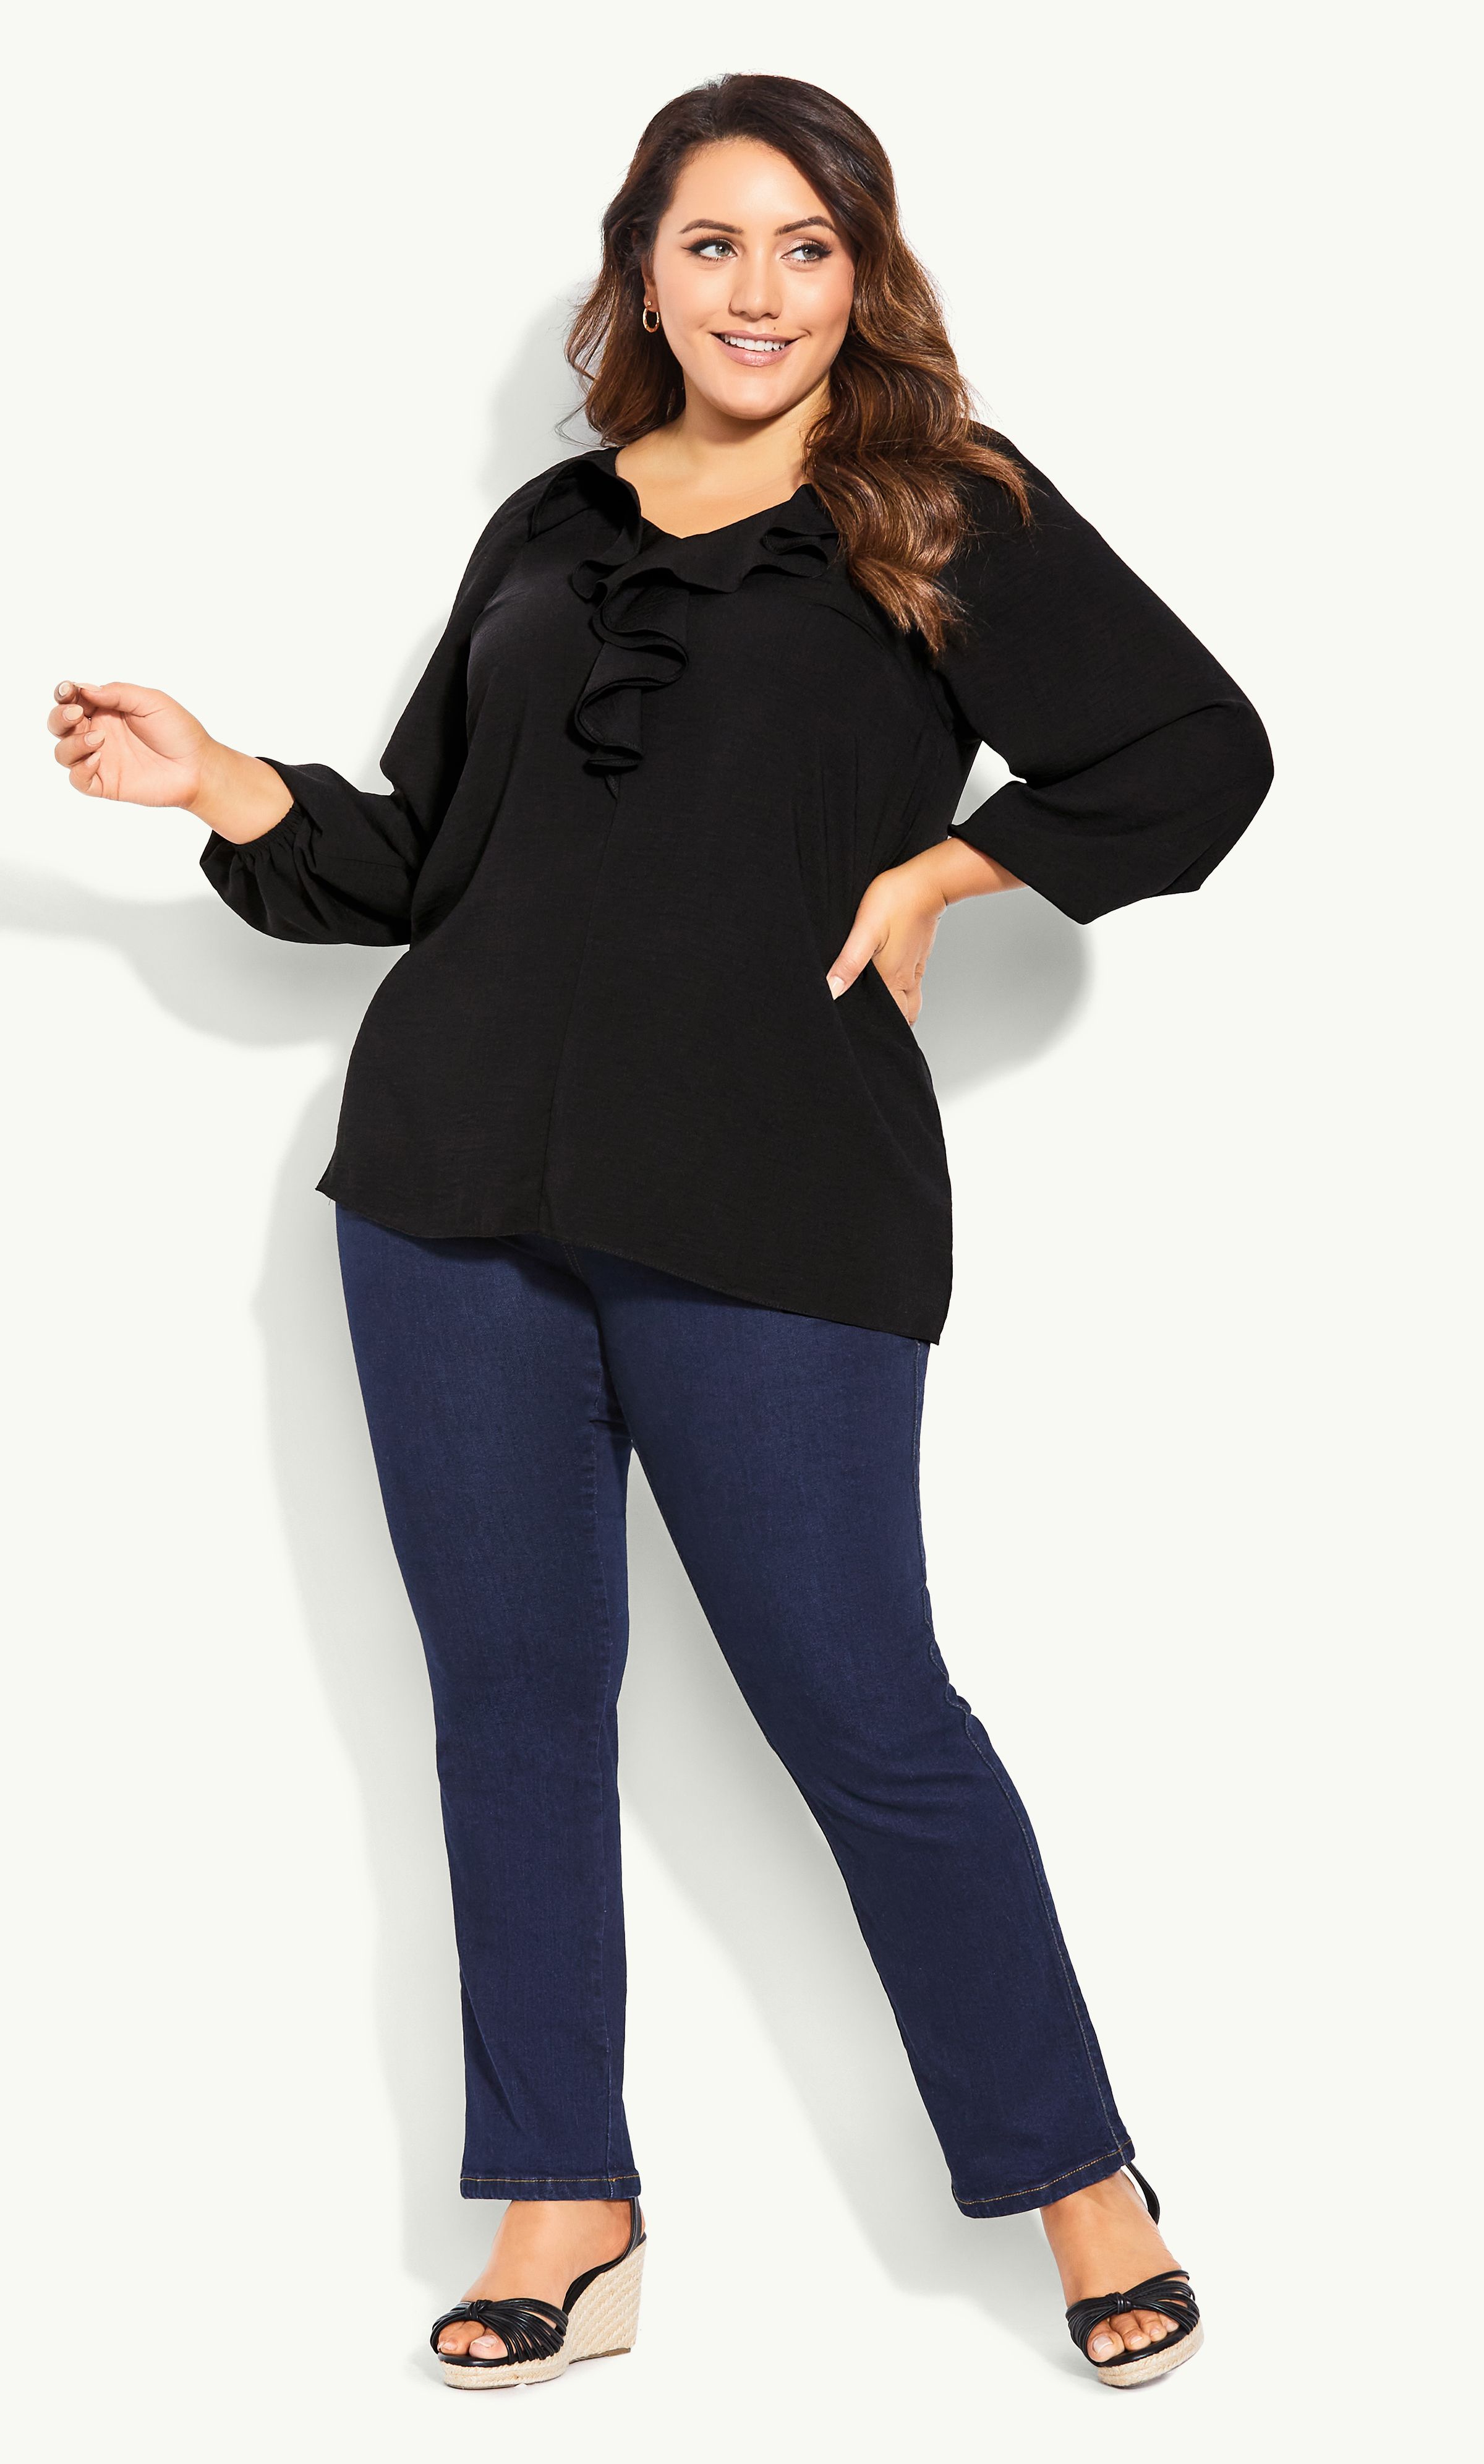 Cute, breezy and undeniably on-trend, the Ruffle Front Blouse will add a touch of chic to your look. Whether you're headed out for brunch with the girls or upstyling for the office, this long sleeved top is the perfect choice every time. Key Features Include: - Ruffled neckline - Long puff sleeves with elasticated cuffs - Relaxed fit - Unlined - Pull over style - Hip length Tuck into a pair of boyfriend jeans and finish with sleek pumps for a glamorous brunch outfit.